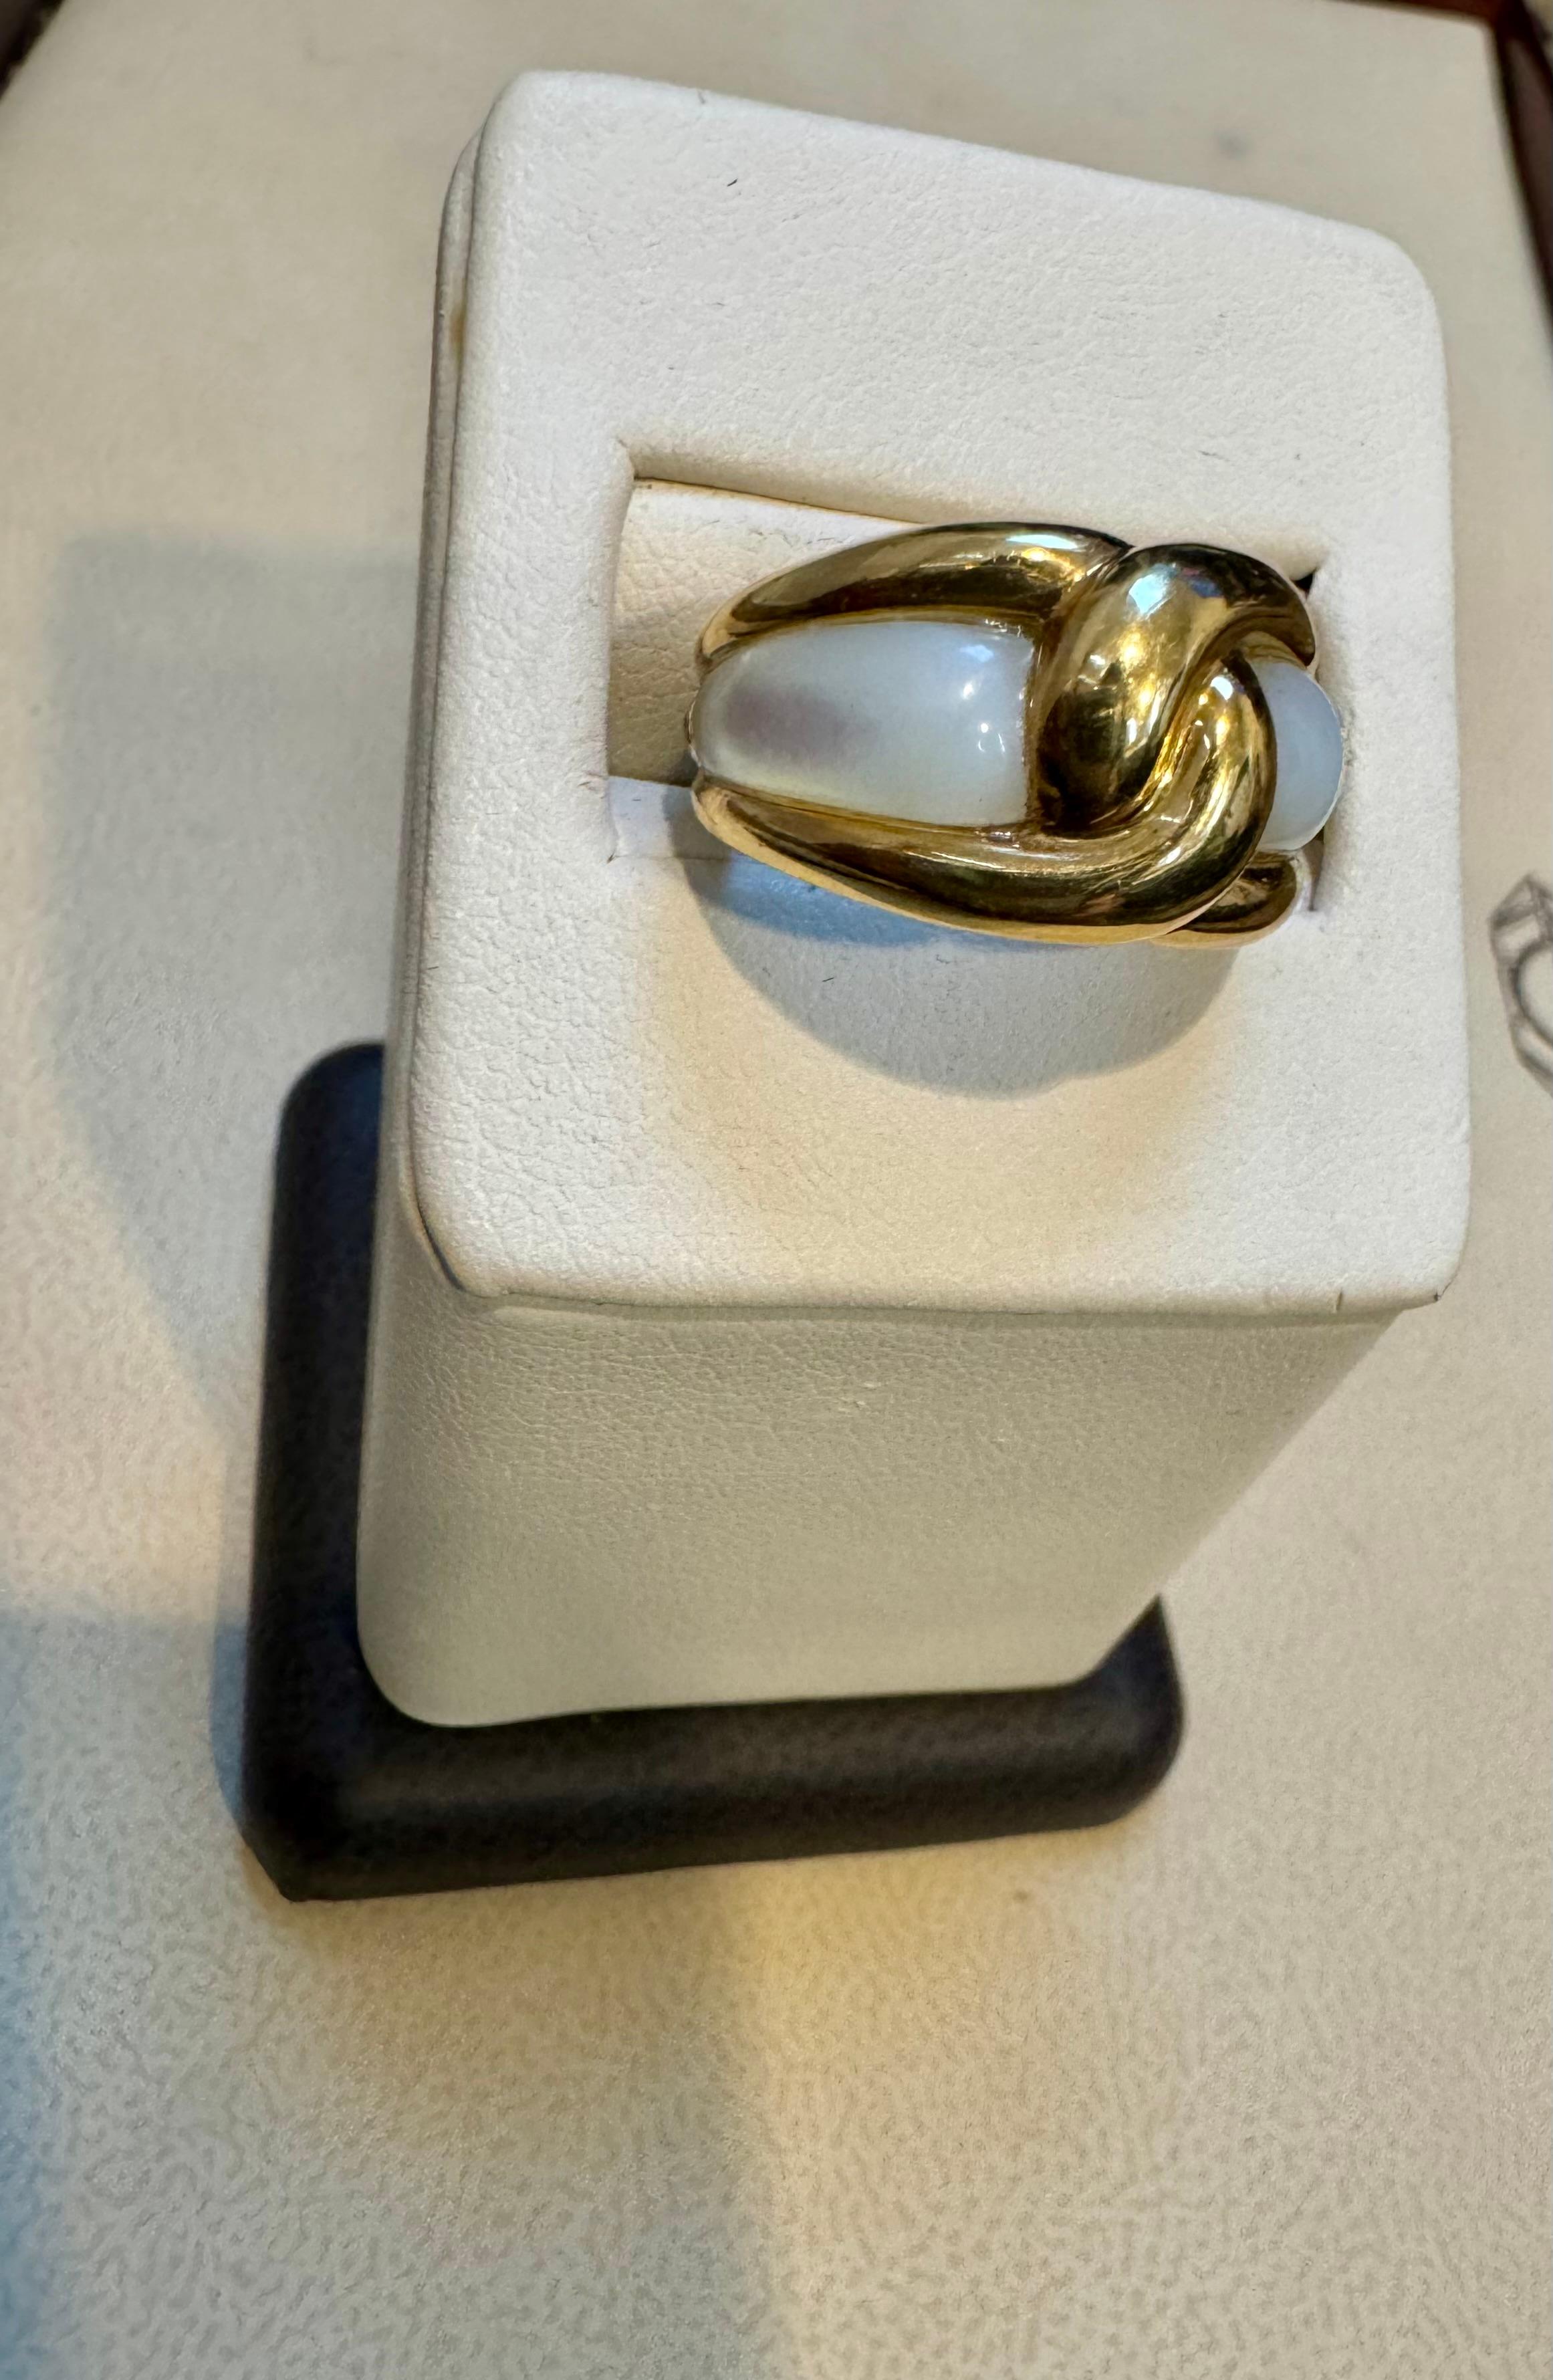 Women's Van Cleef & Arpels Contemporary Mother of pearl “Twisted” Ring 18KY Gold Size5.5 For Sale